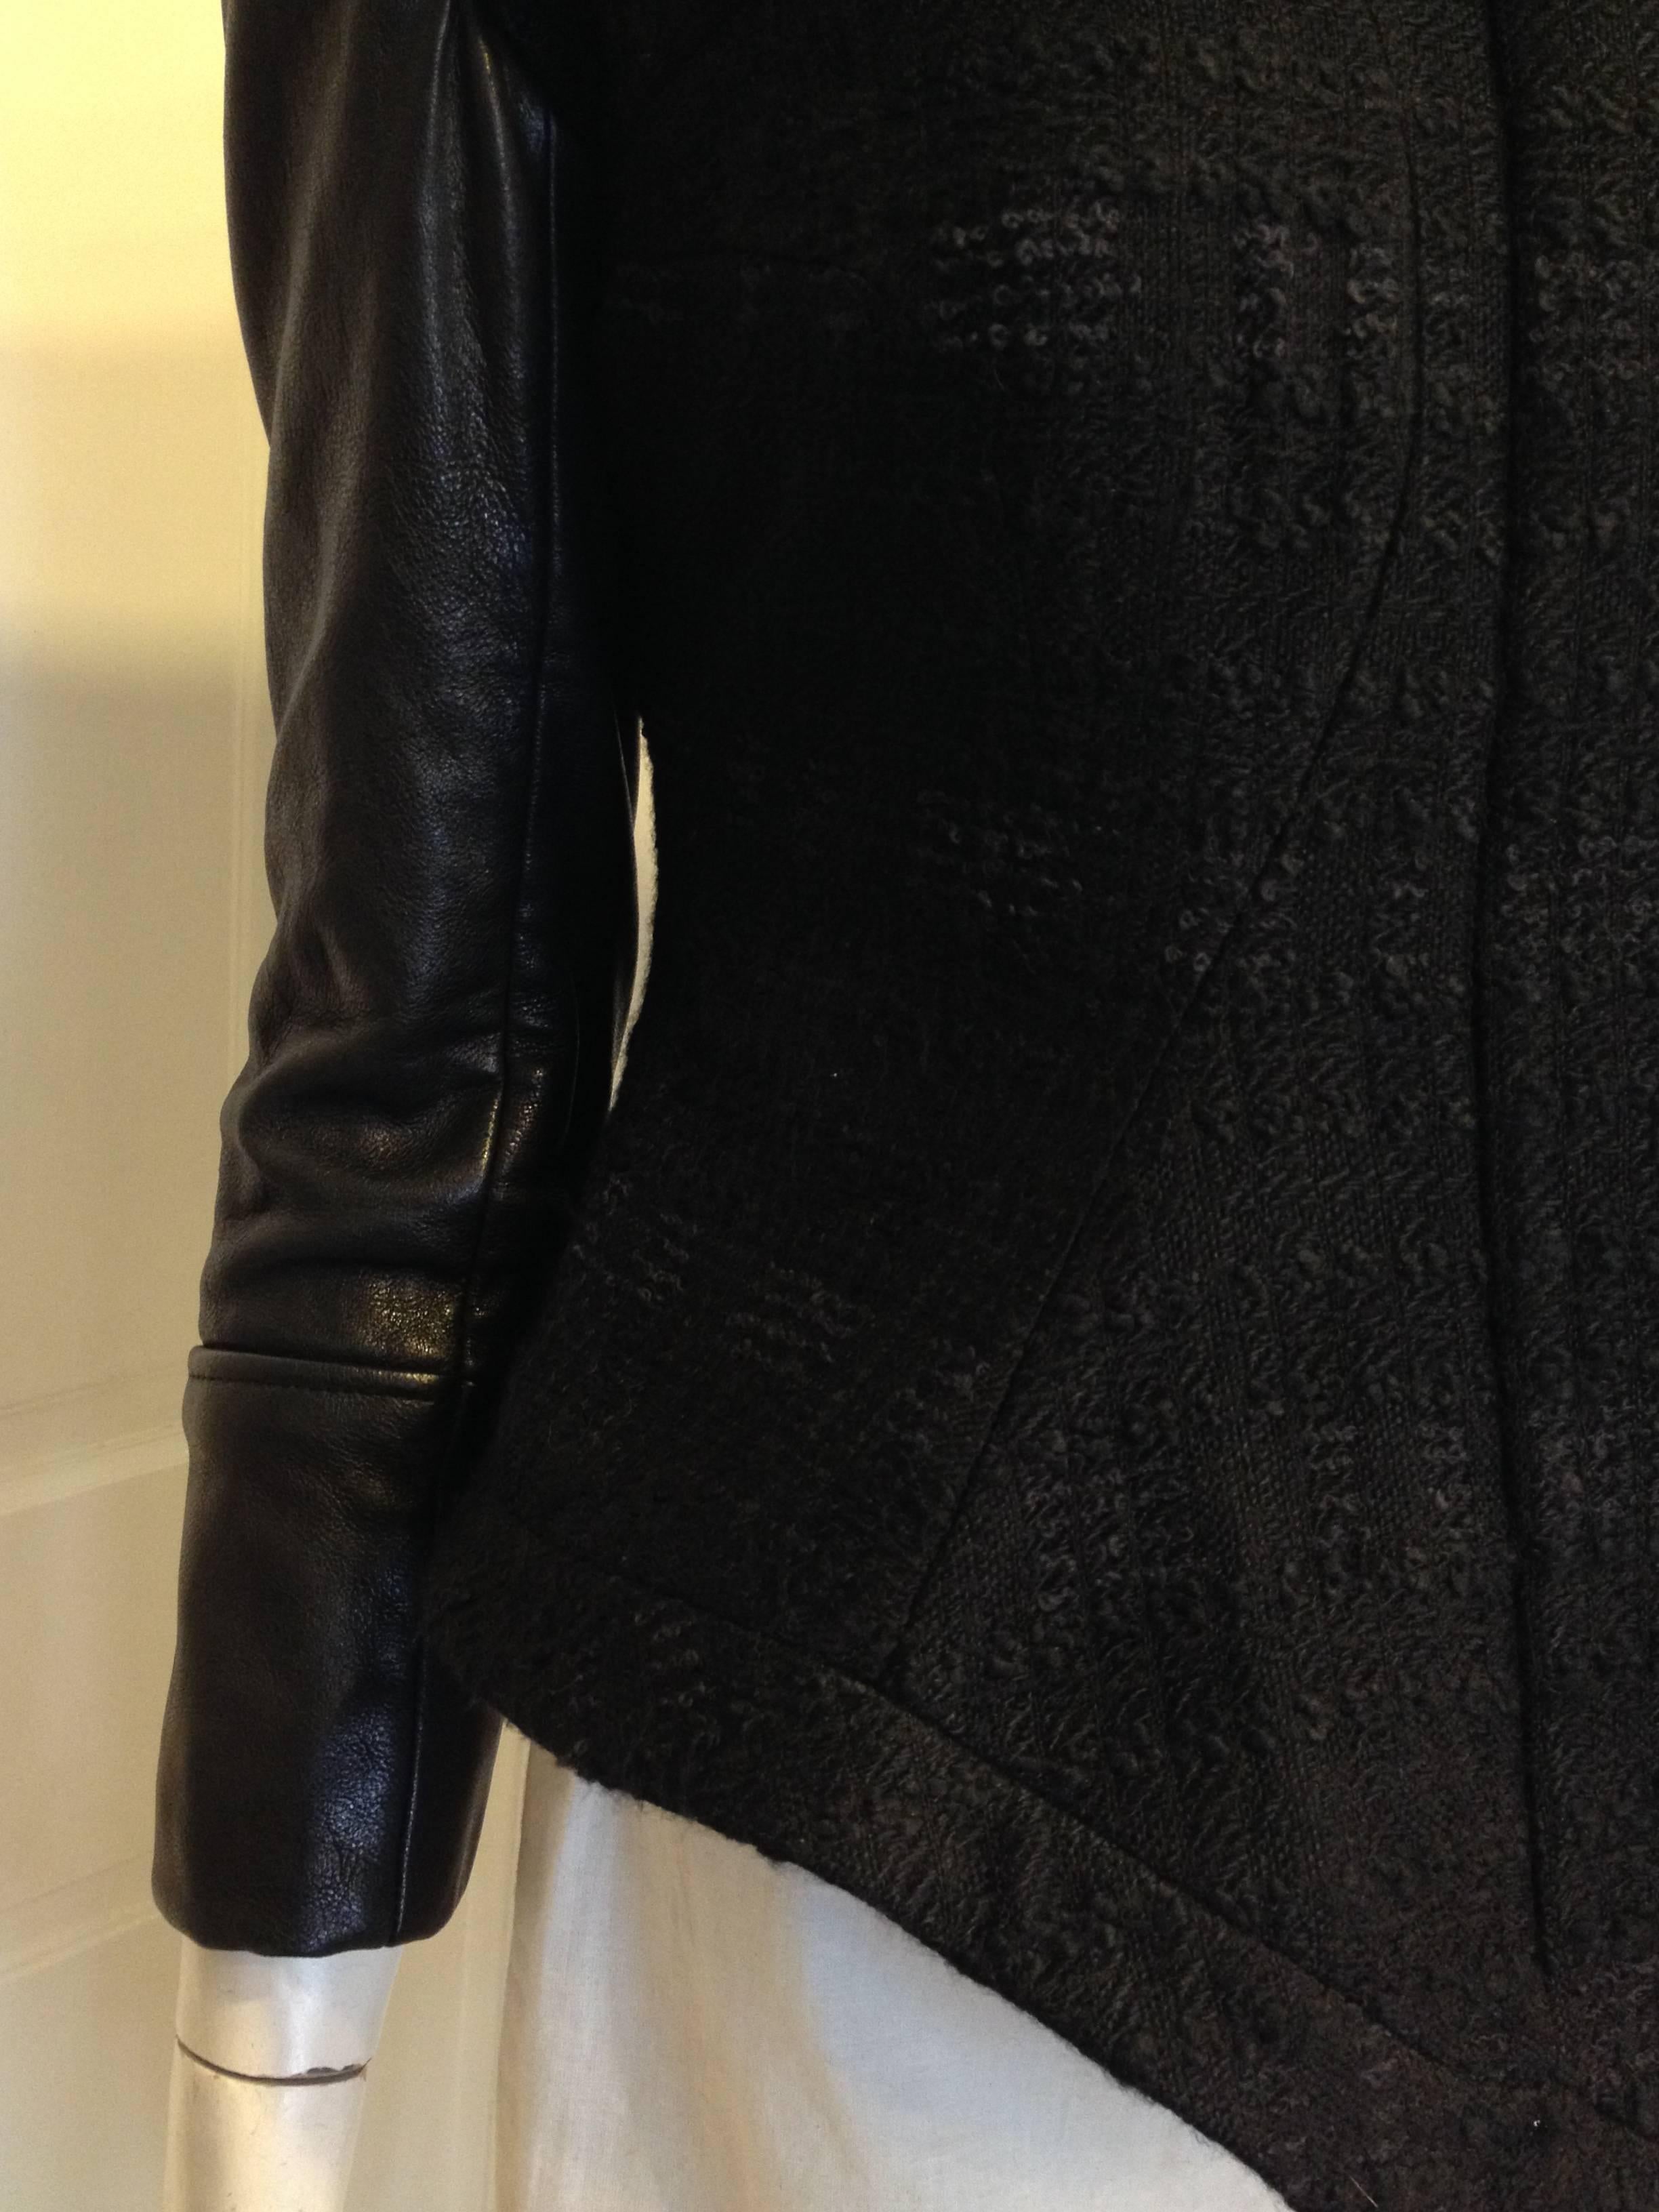 Givenchy Black Tweed Jacket with Leather Sleeves 5